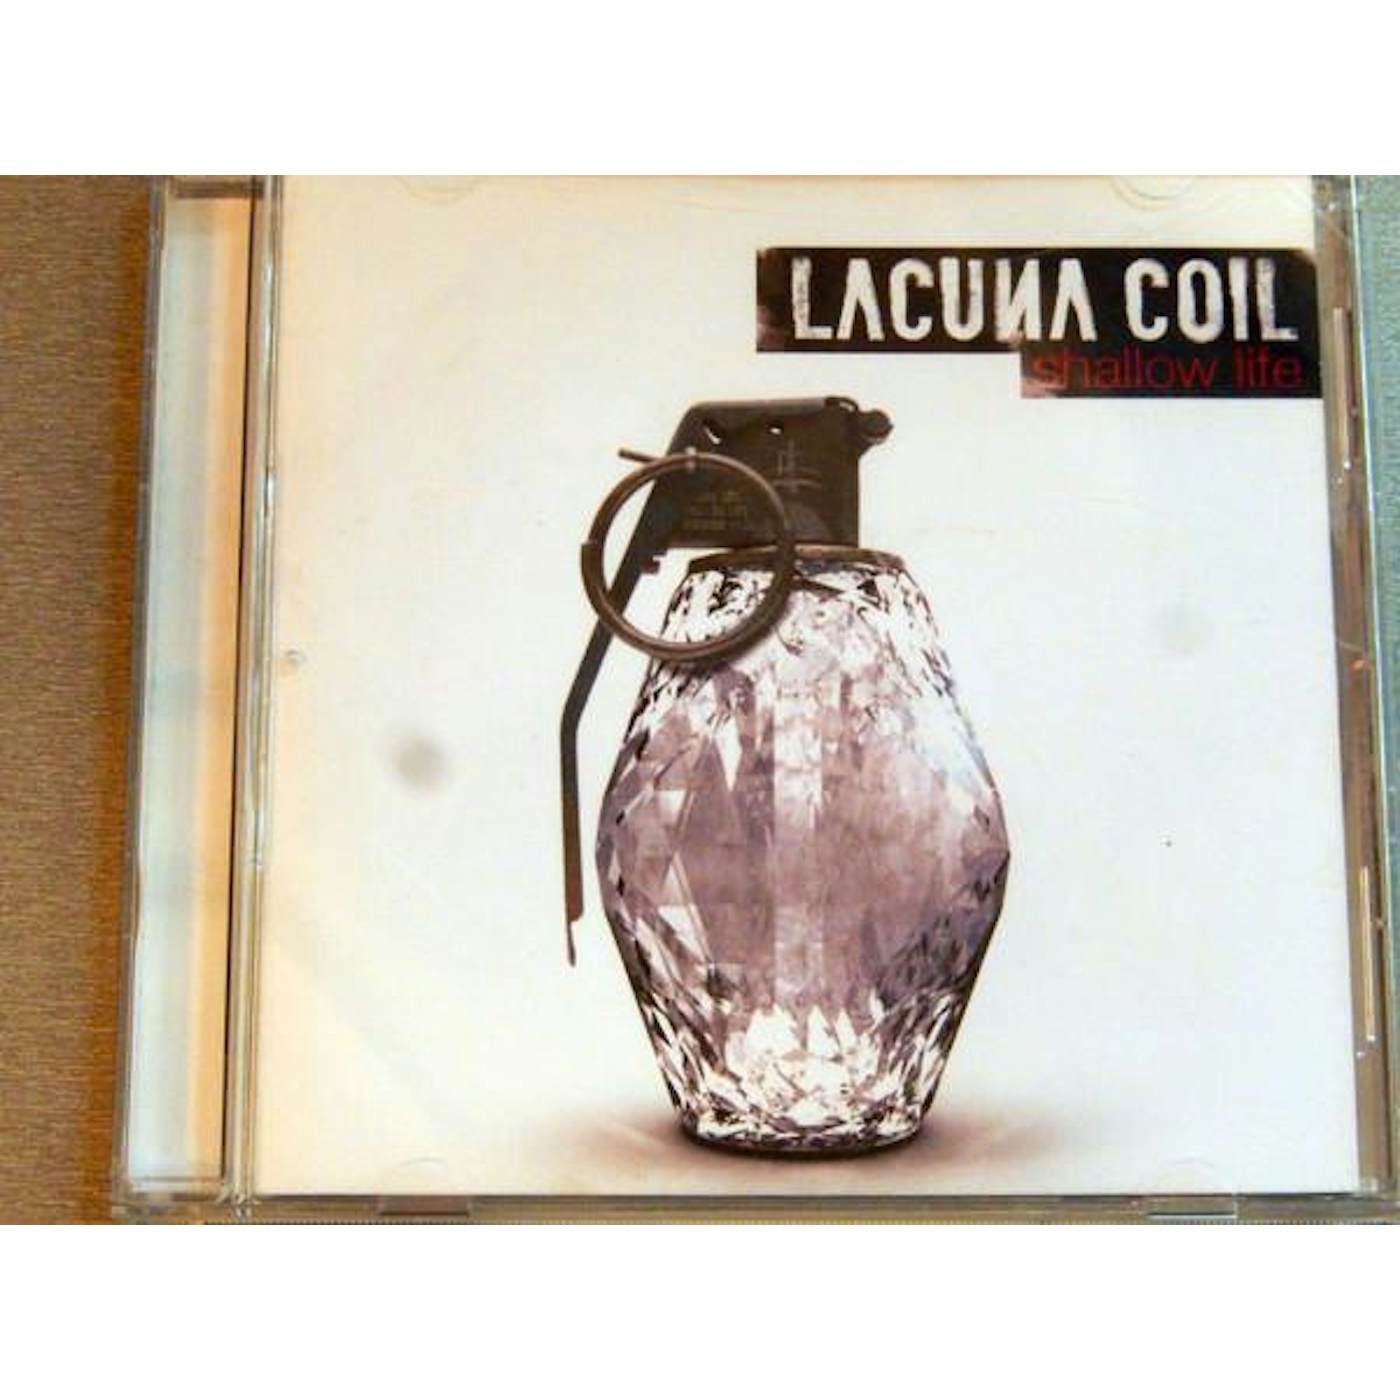 Lacuna Coil SHALLOW LIFE CD